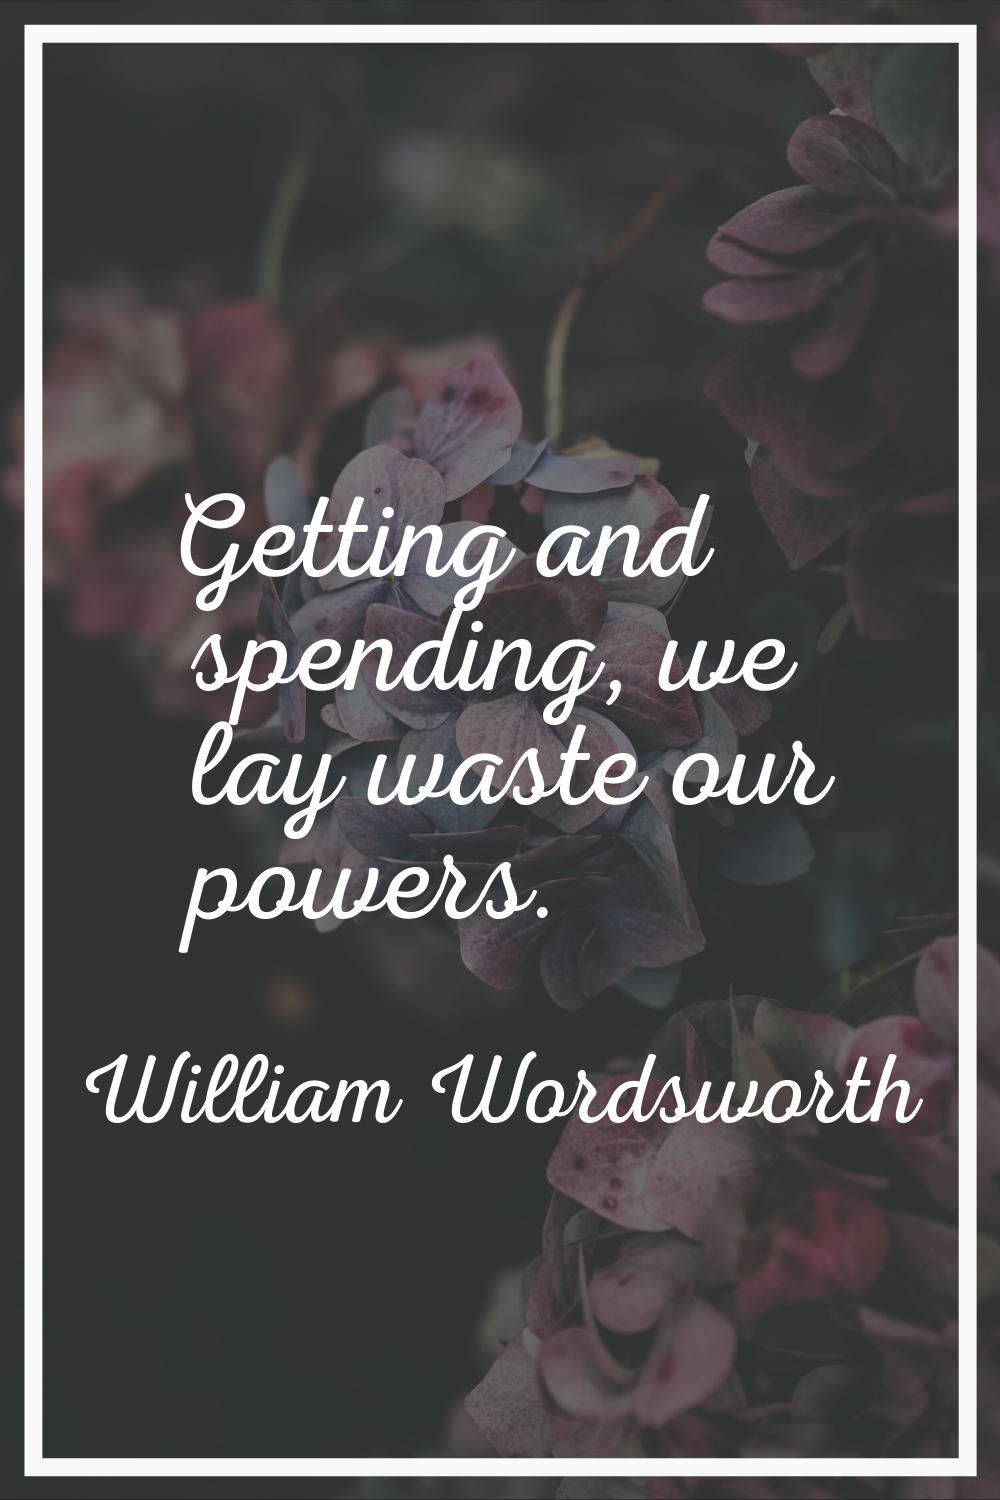 Getting and spending, we lay waste our powers.